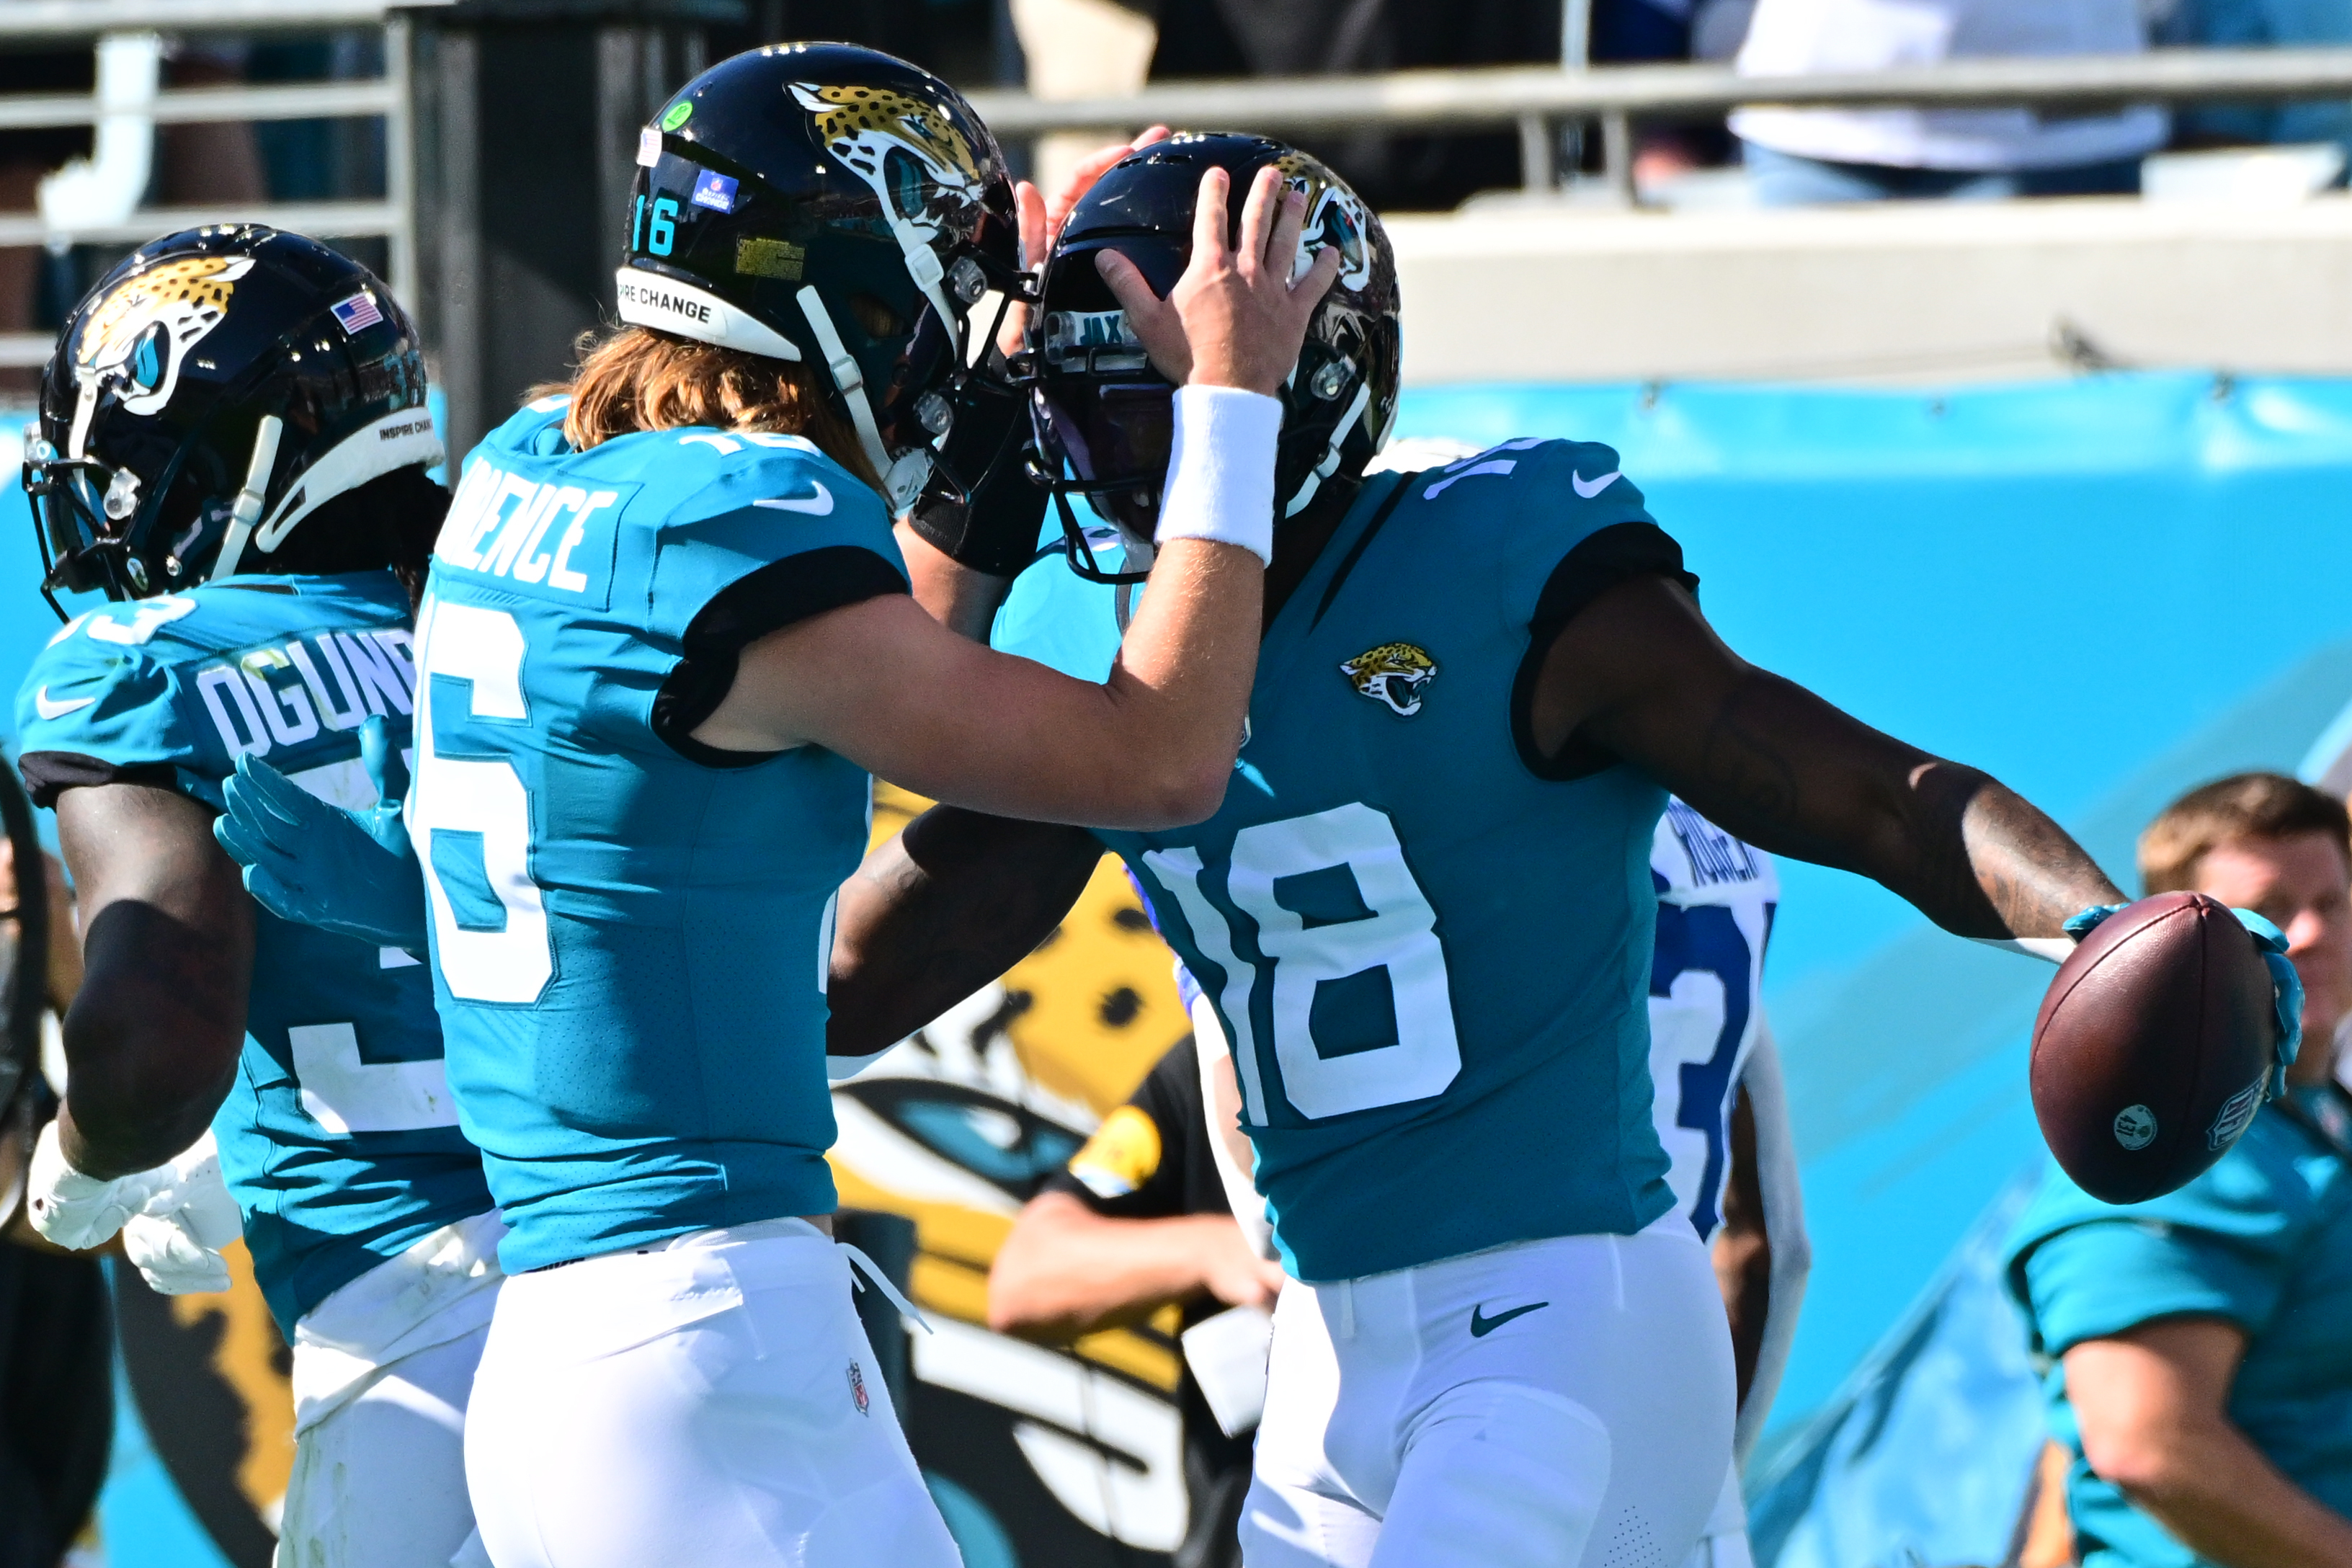 Trevor Lawrence led the Jaguars to an upset of the Colts on Sunday